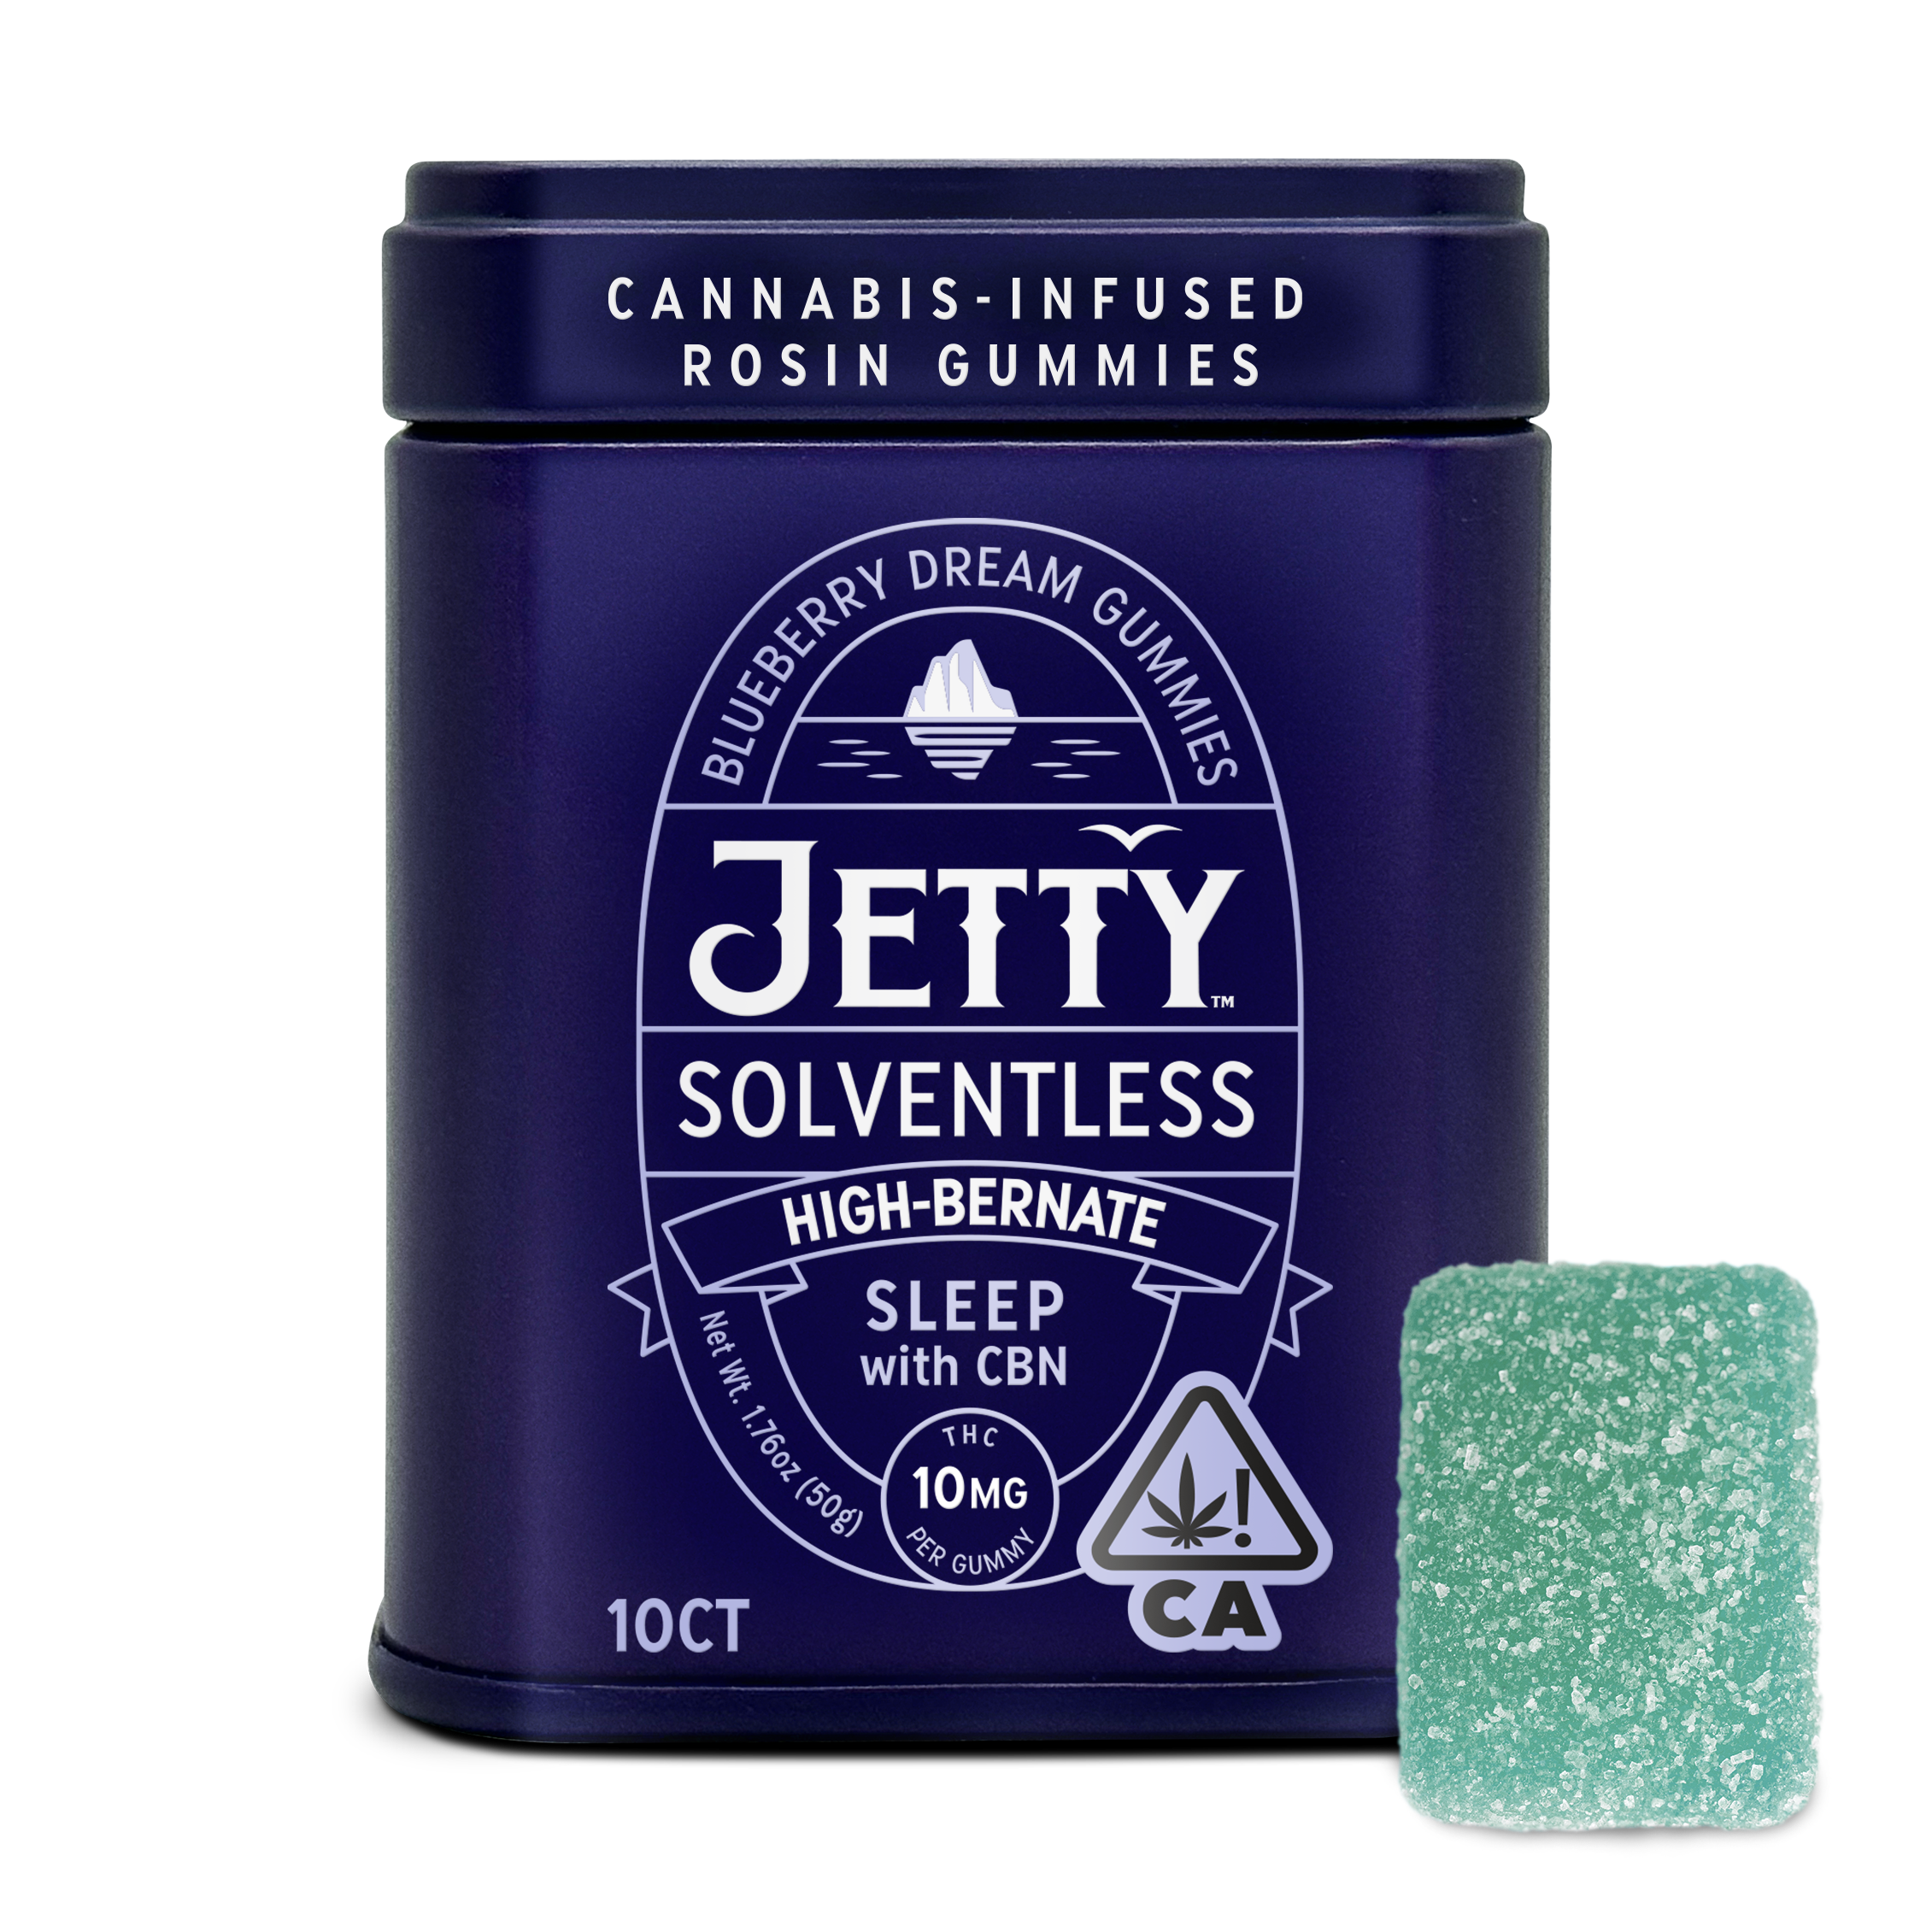 A photograph of Jetty Solventless Rosin Gummies 5:1 - 20mg CBN Blueberry Dream, 10ct, 100mg THC